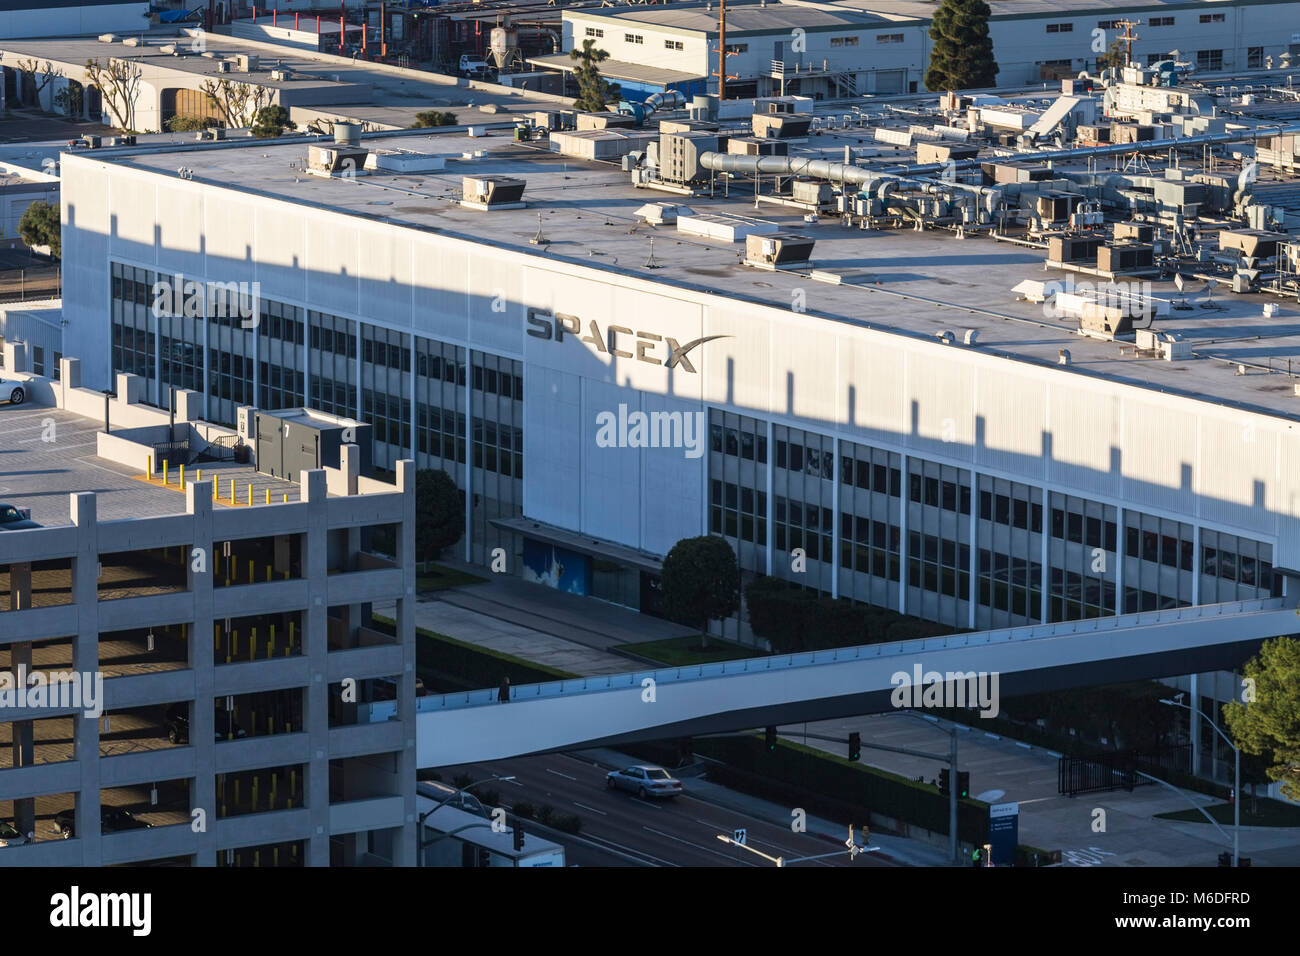 Hawthorne, California, USA - February 20, 2018:  Aerial view of the SPACEX headquarters and rocket manufacturing building. Stock Photo